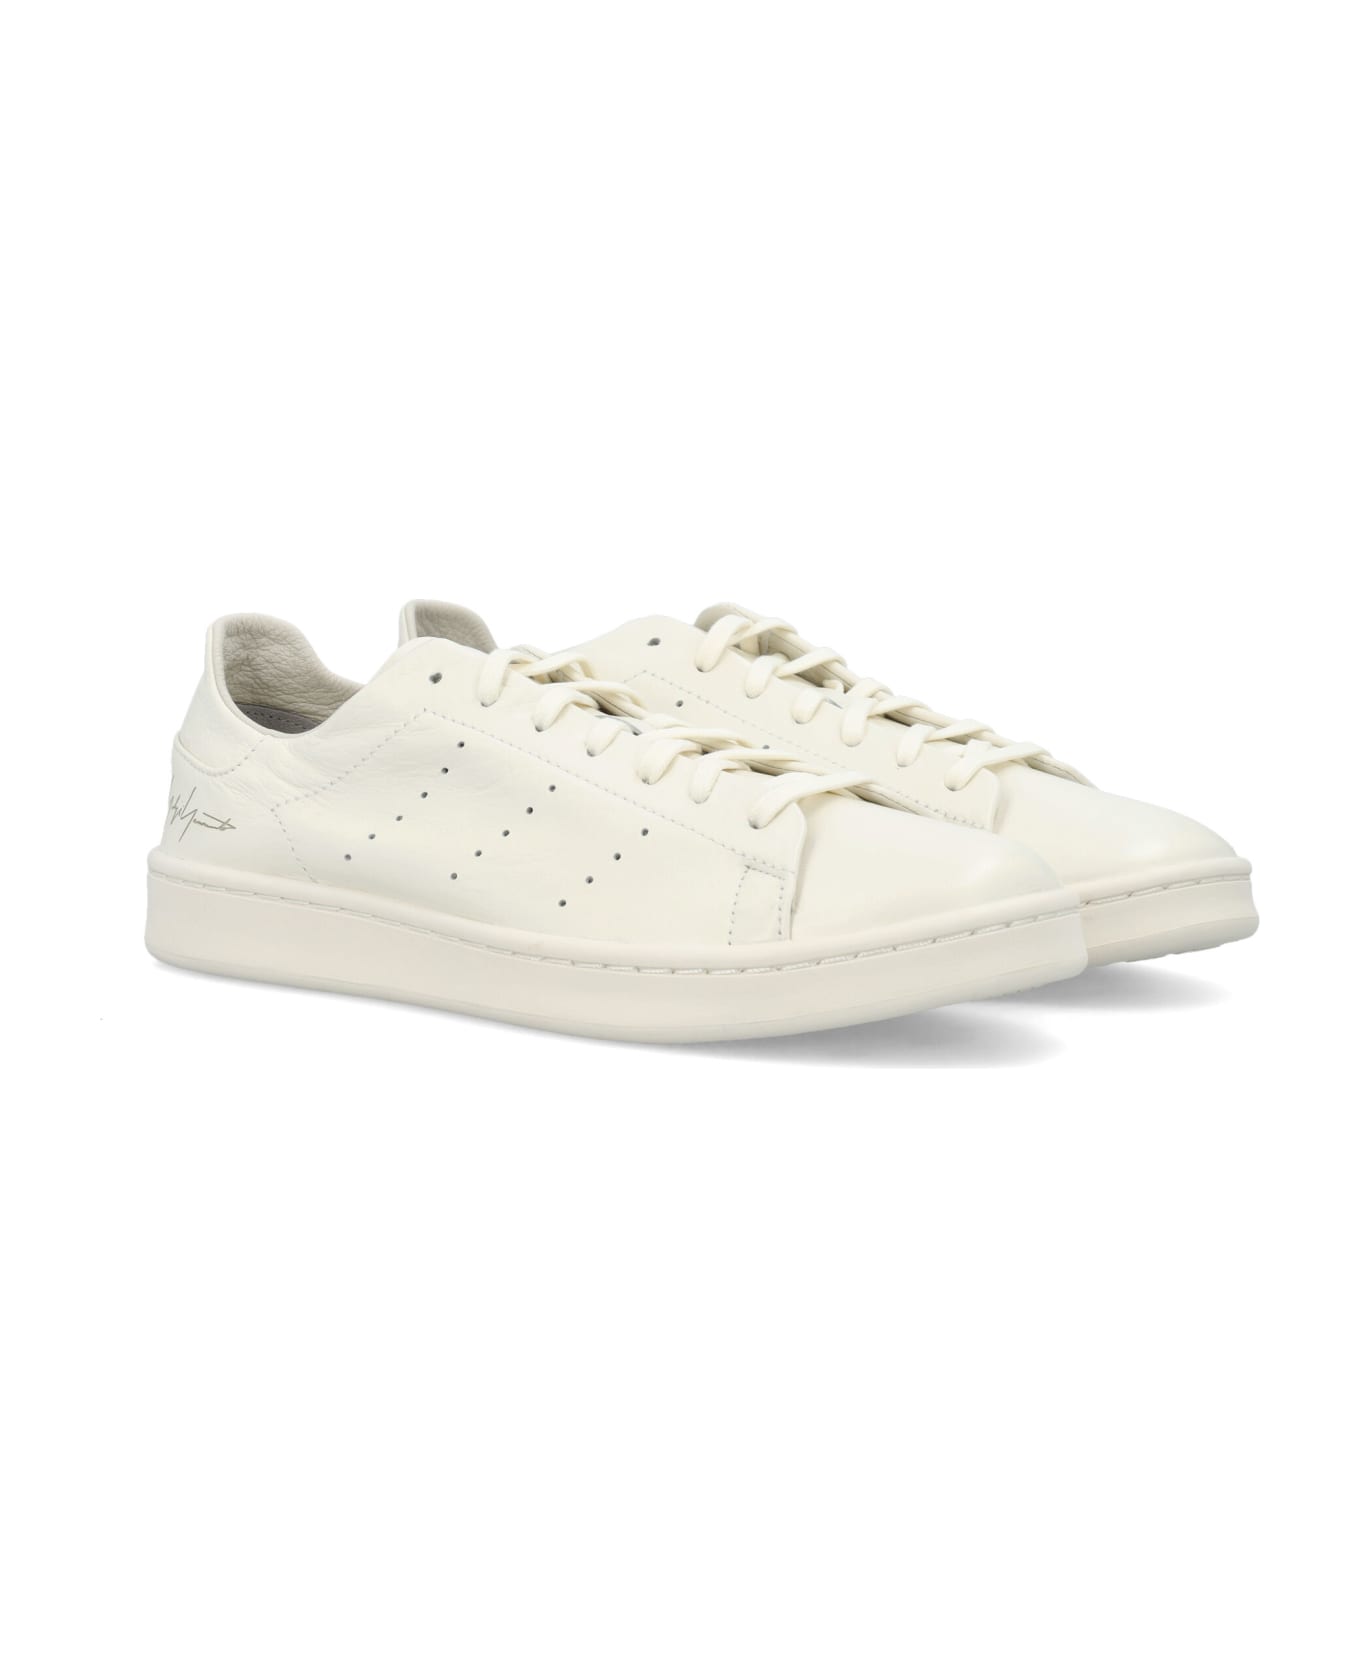 Y-3 Stan Smith Sneakers - WHITE